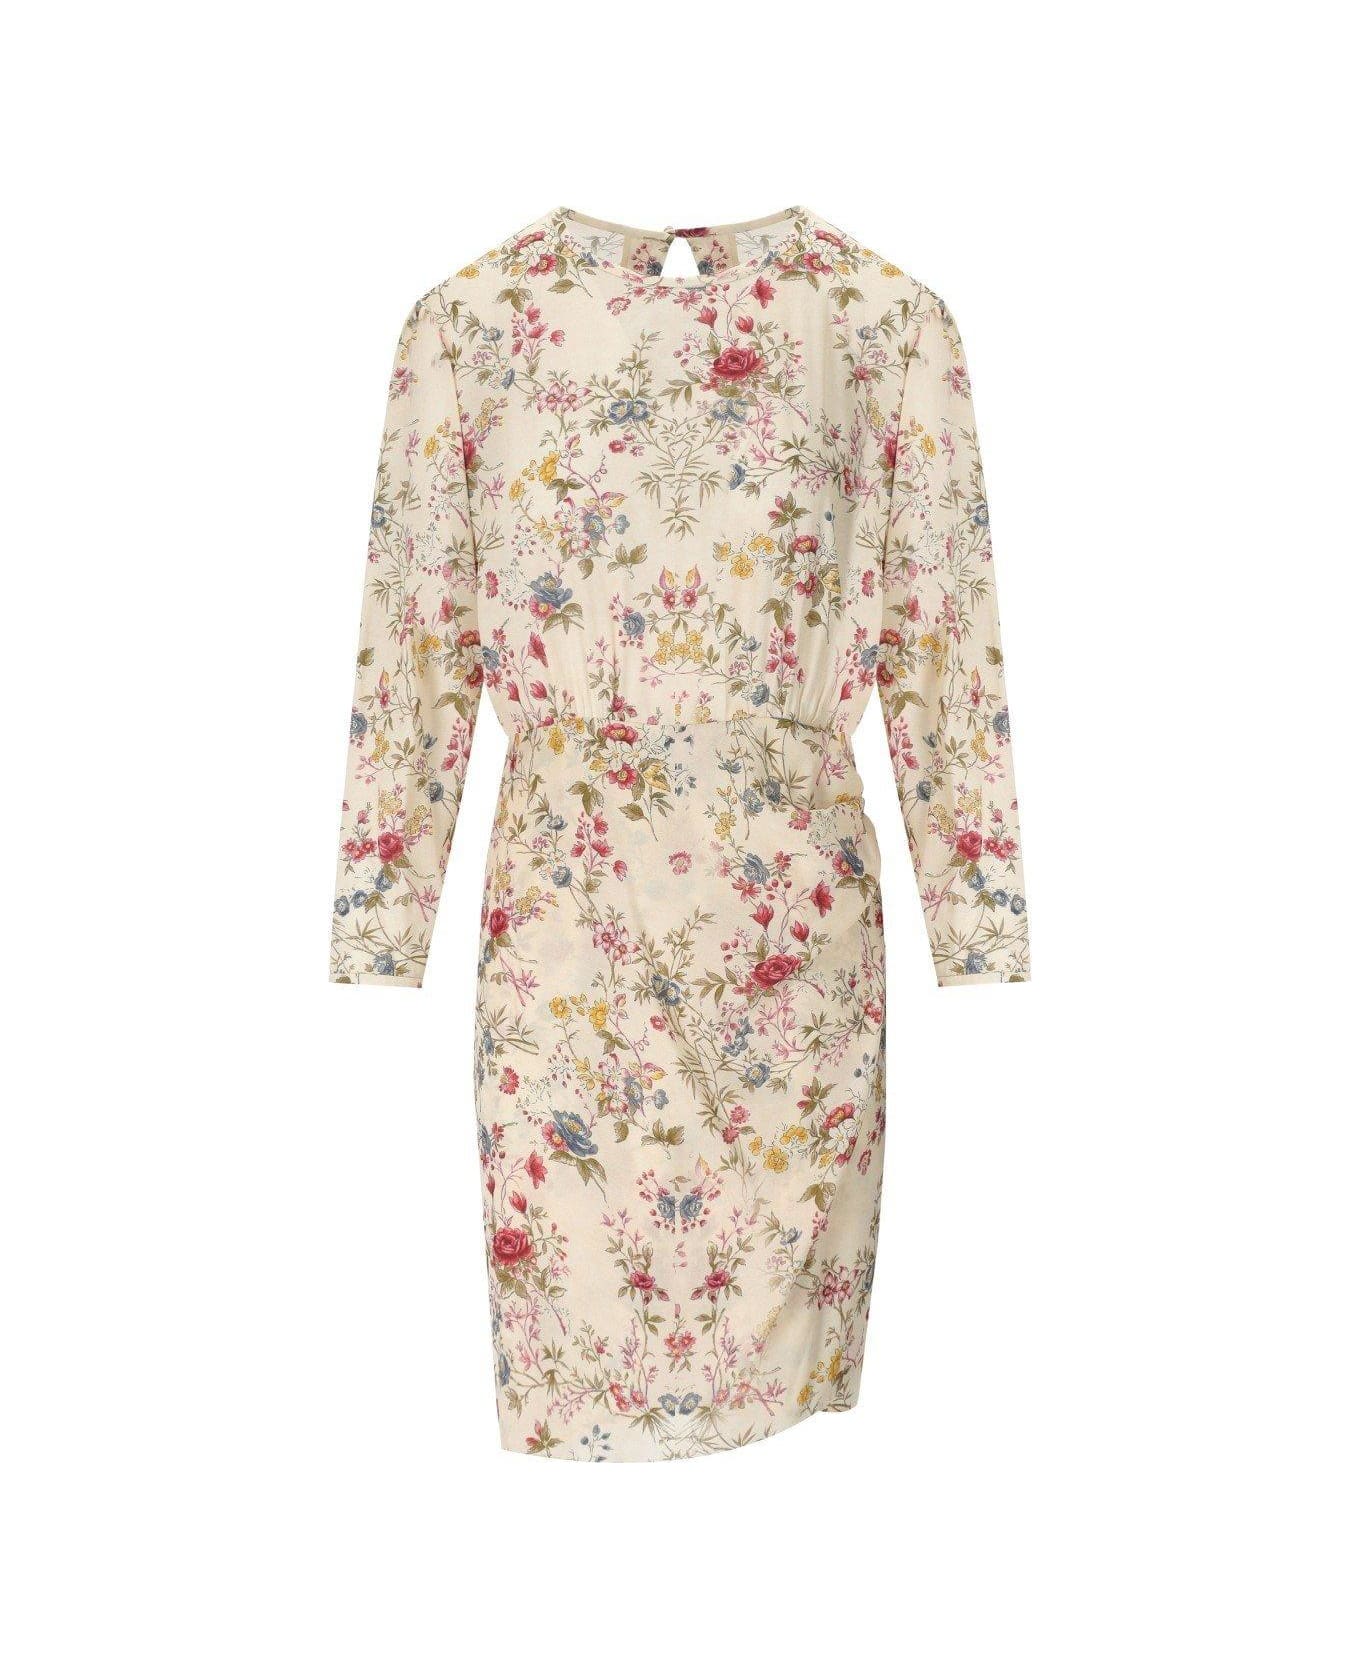 Weekend Max Mara All-over Floral Patterned Dress - Avorio